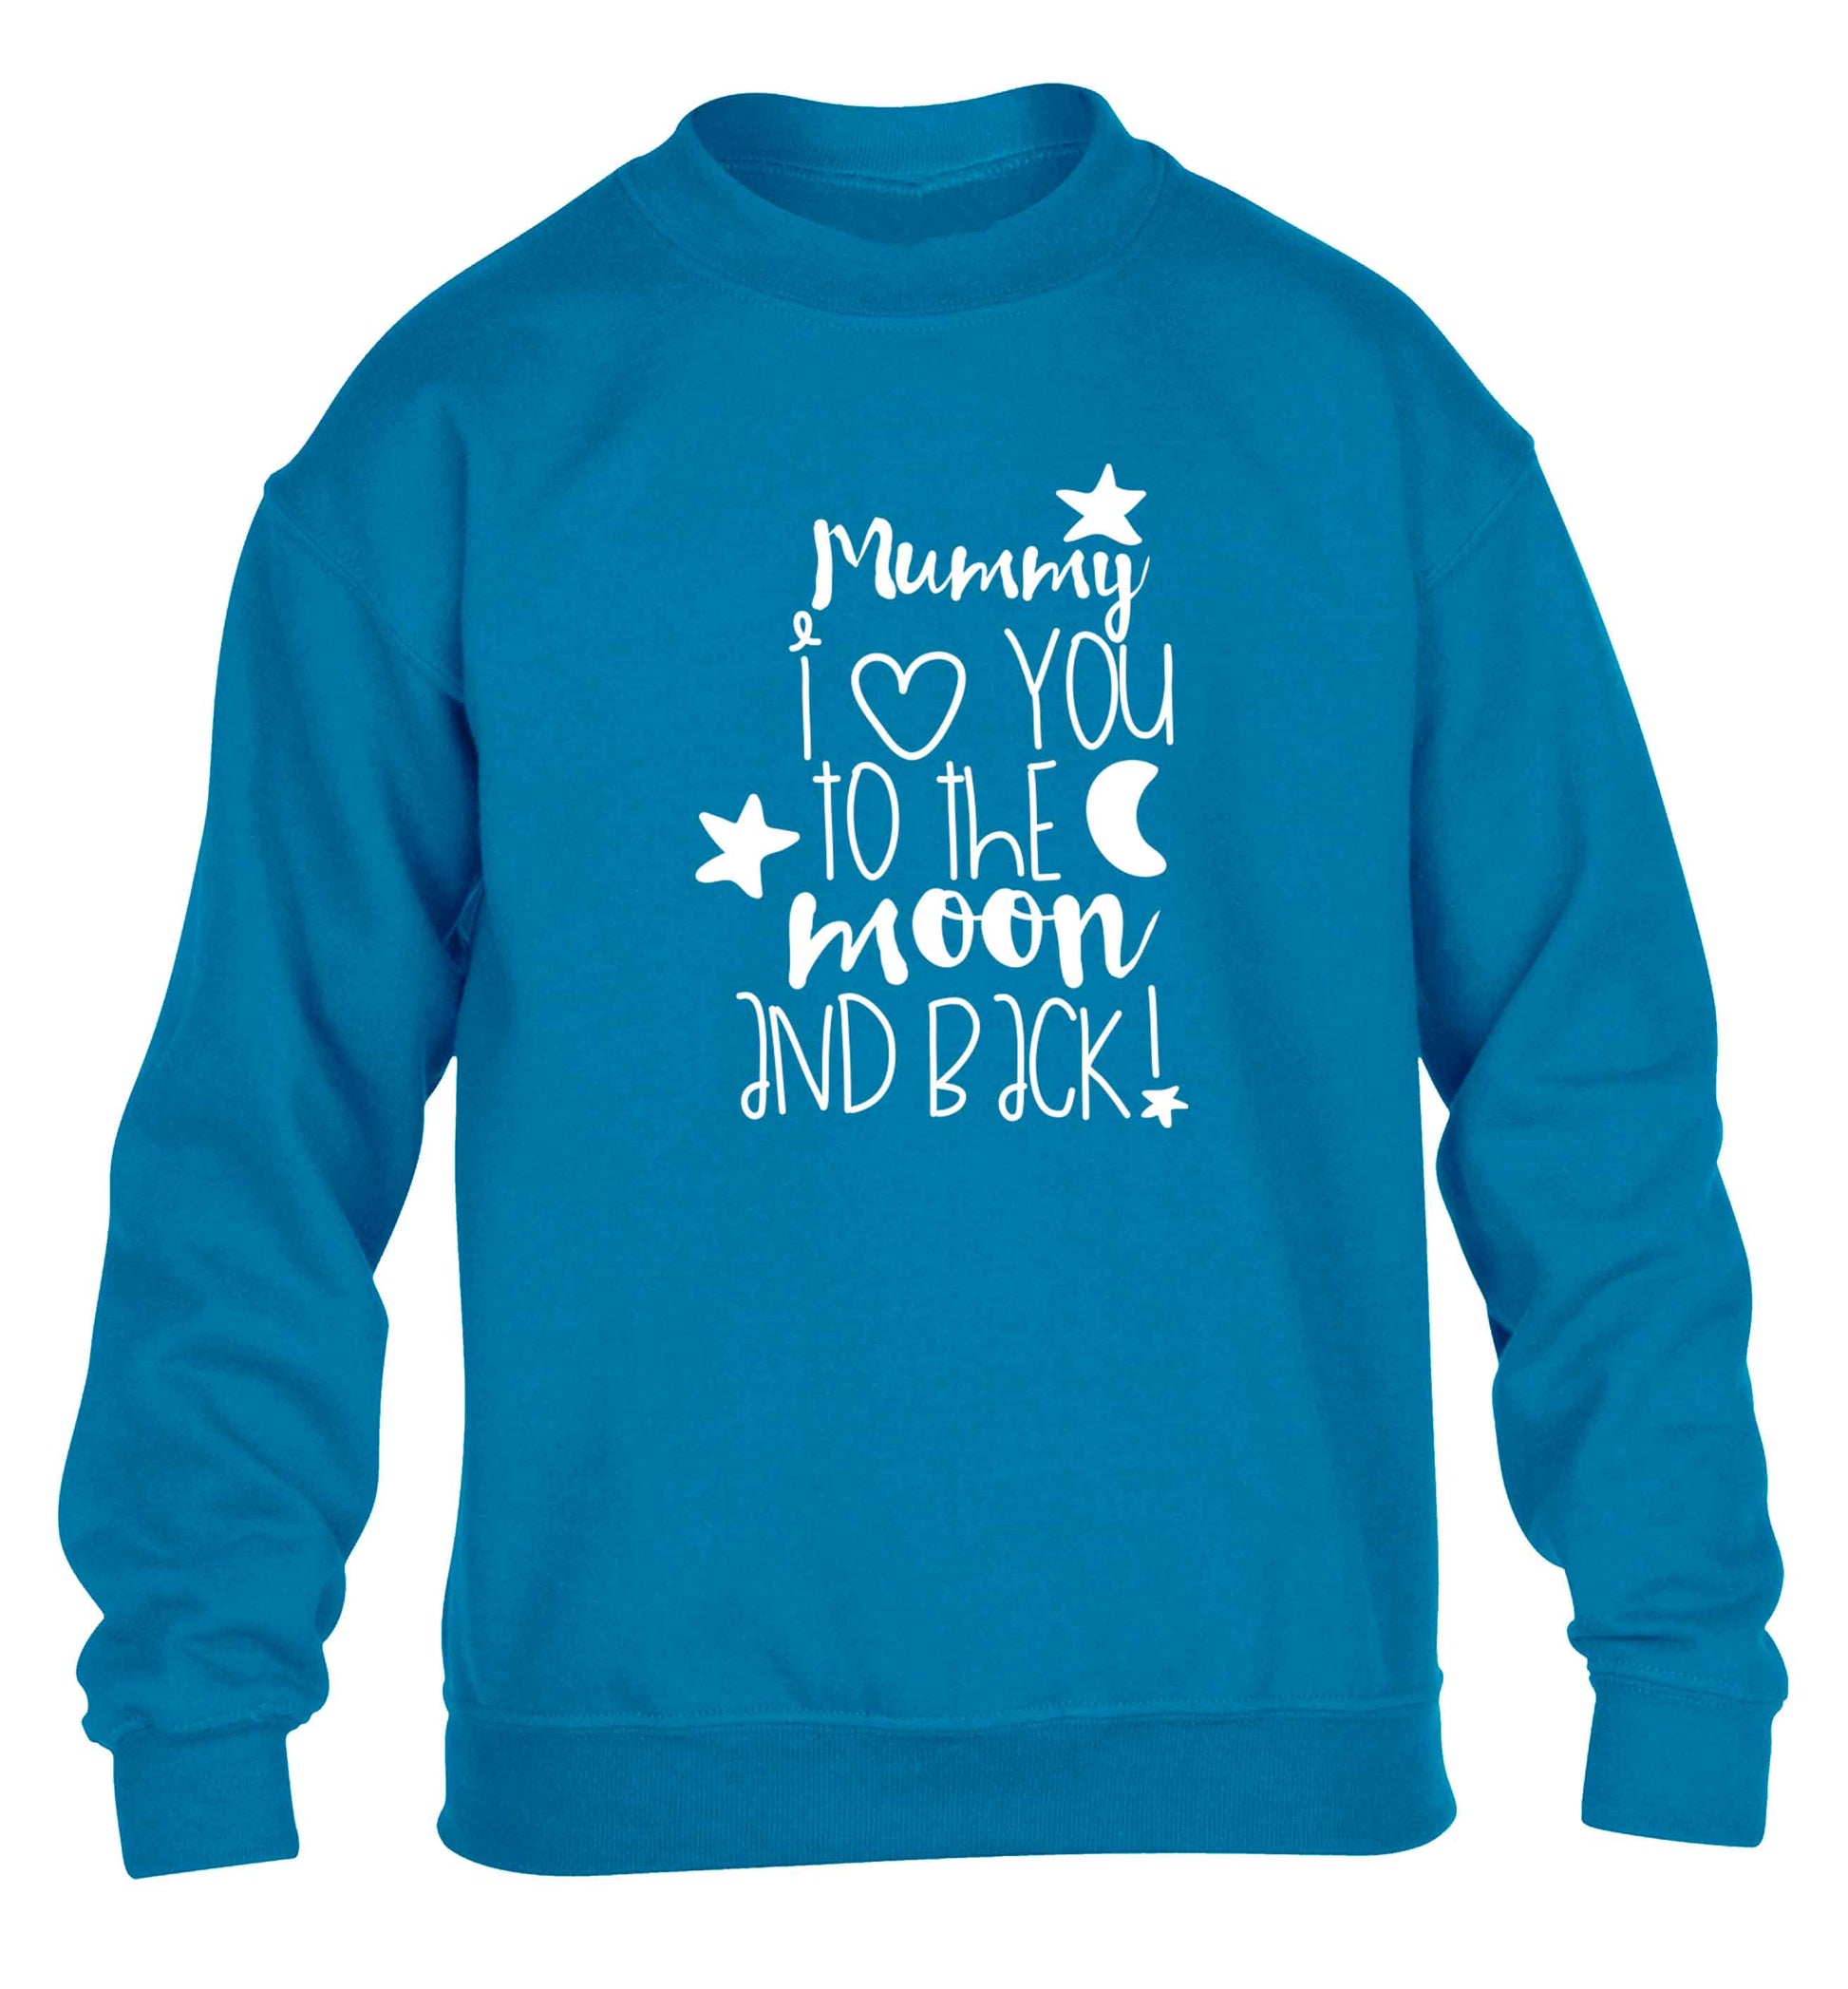 Mummy I love you to the moon and back children's blue sweater 12-13 Years